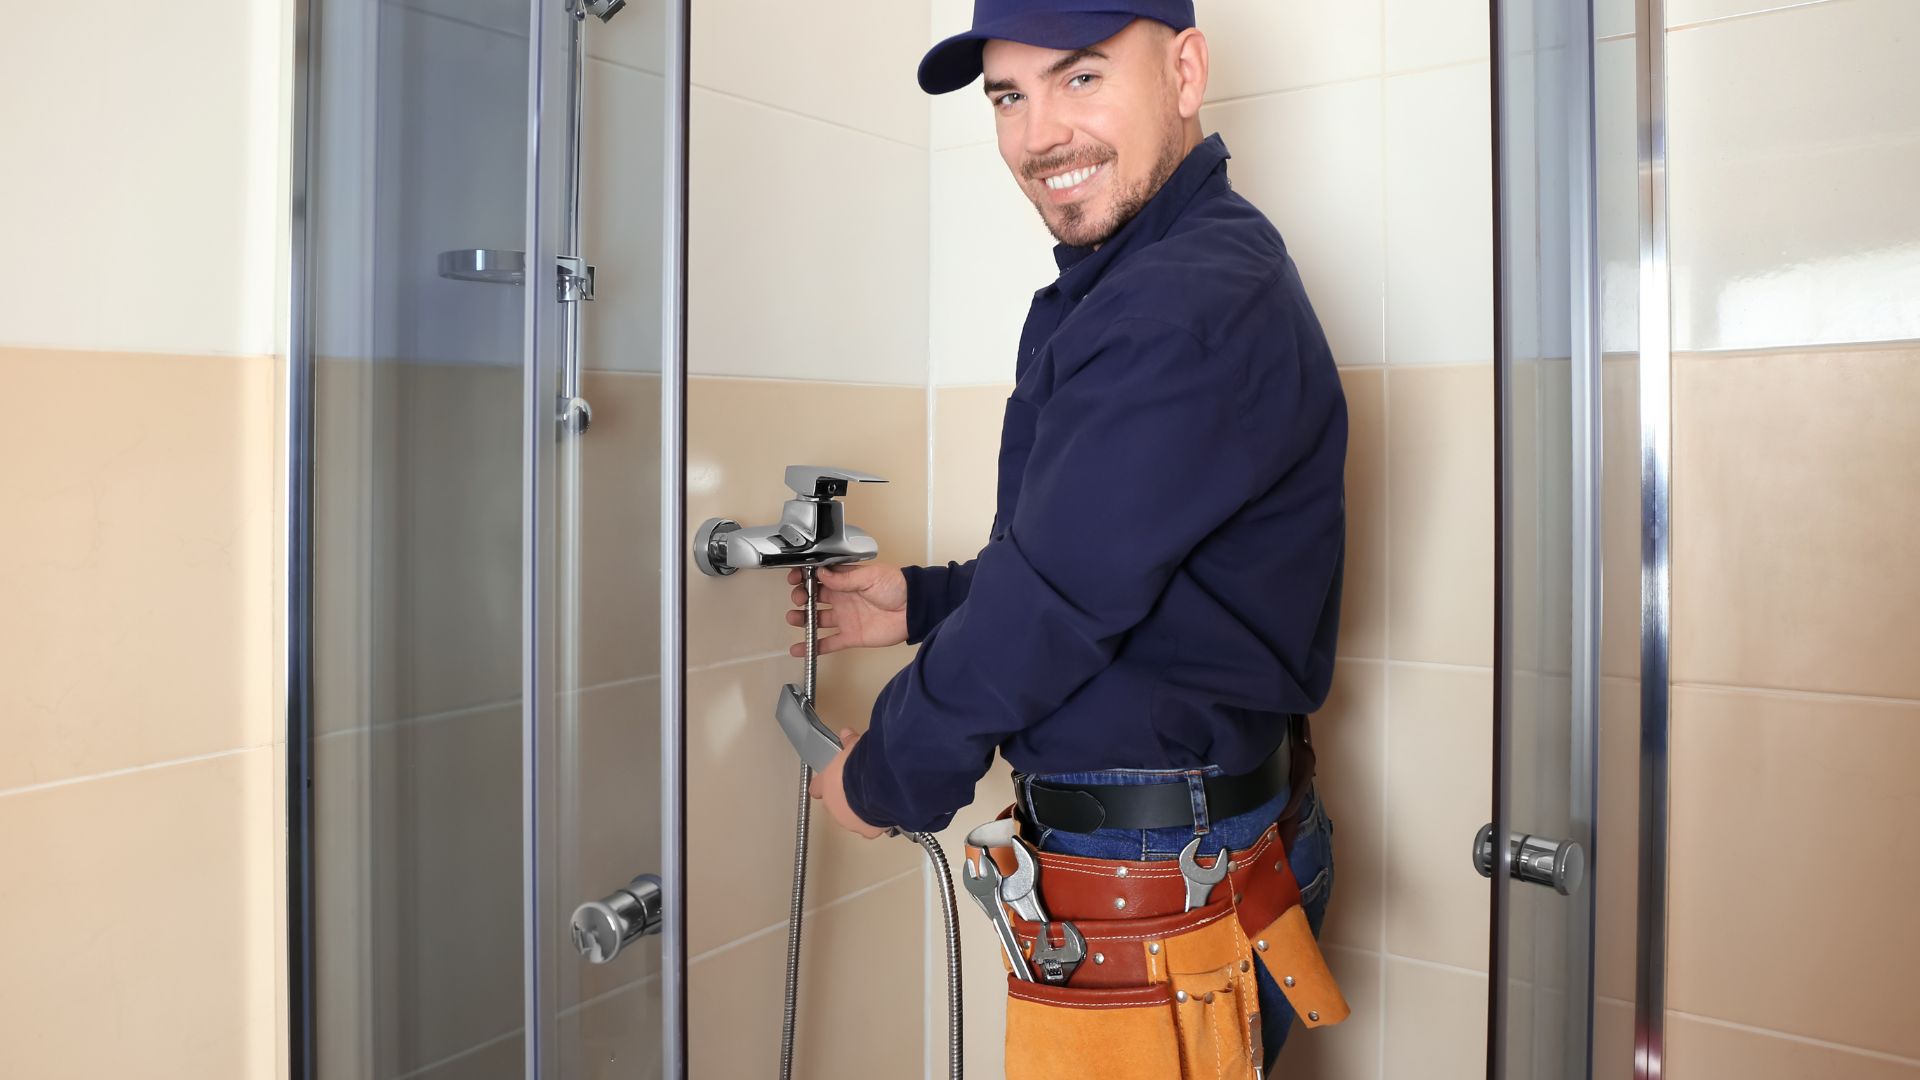 Services for Showers and Tubs Provided by CAN Plumbing and Drainage